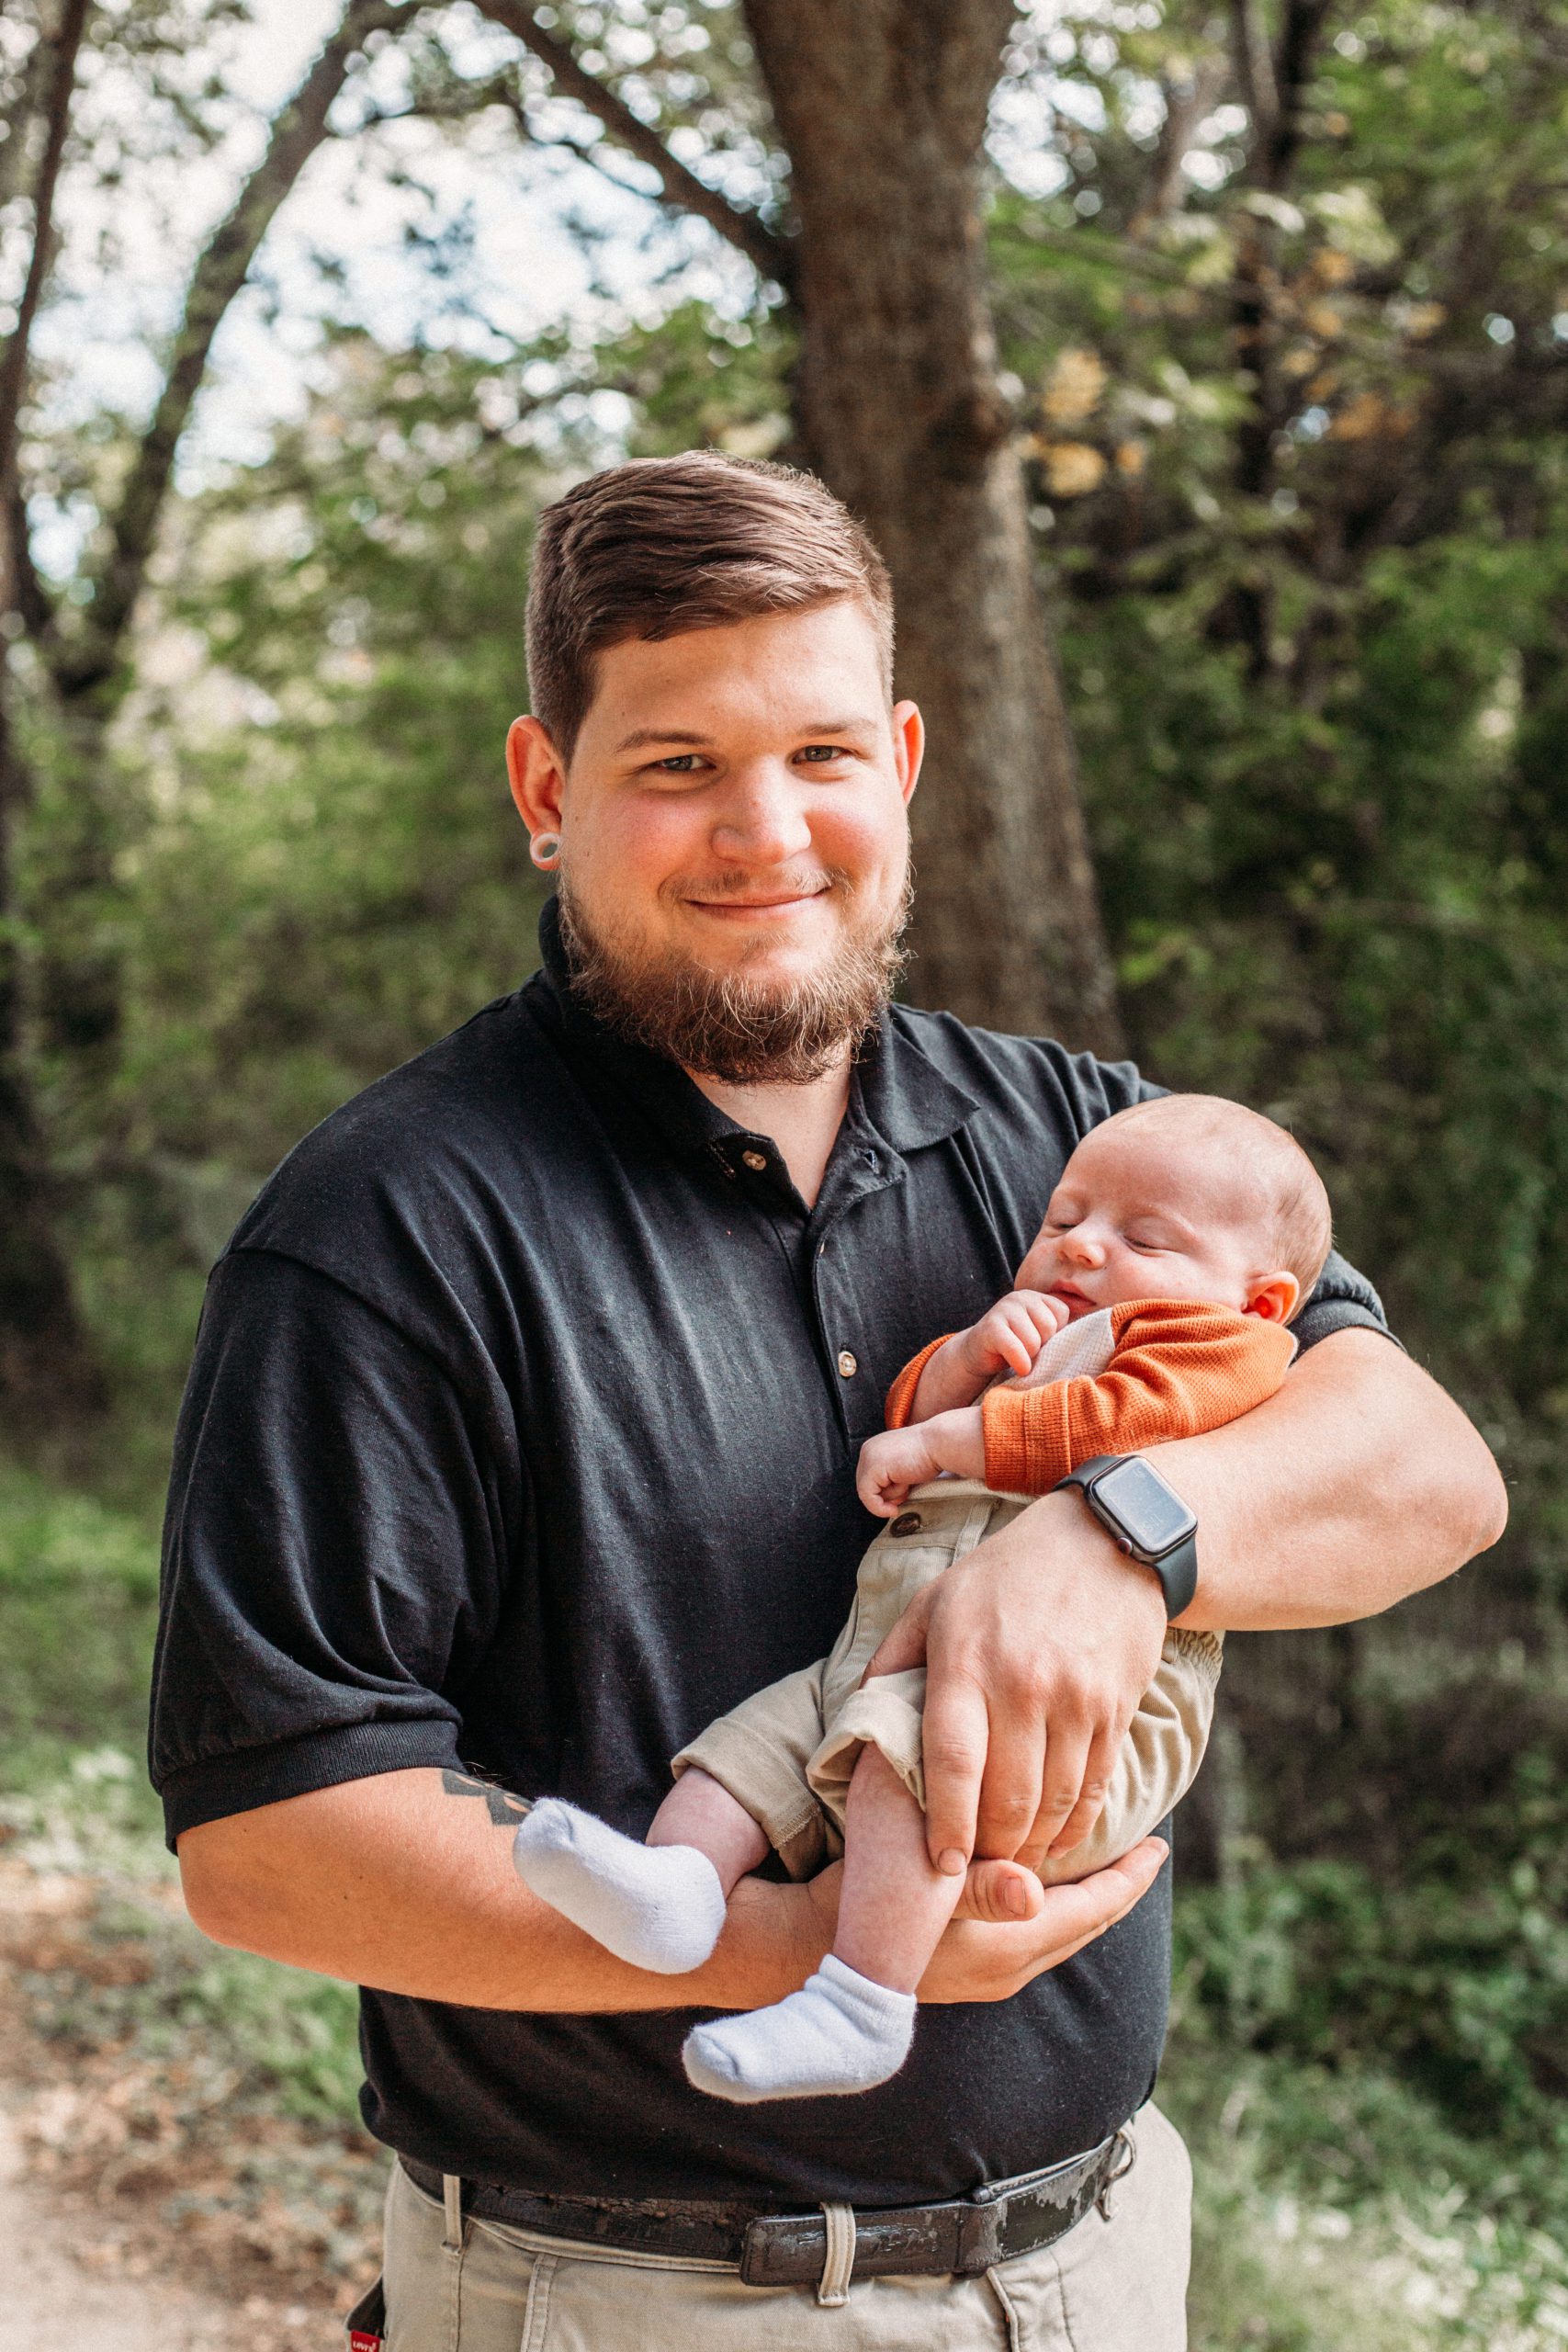 Hampton Roads family photos of father and baby son together outside on a dirt path